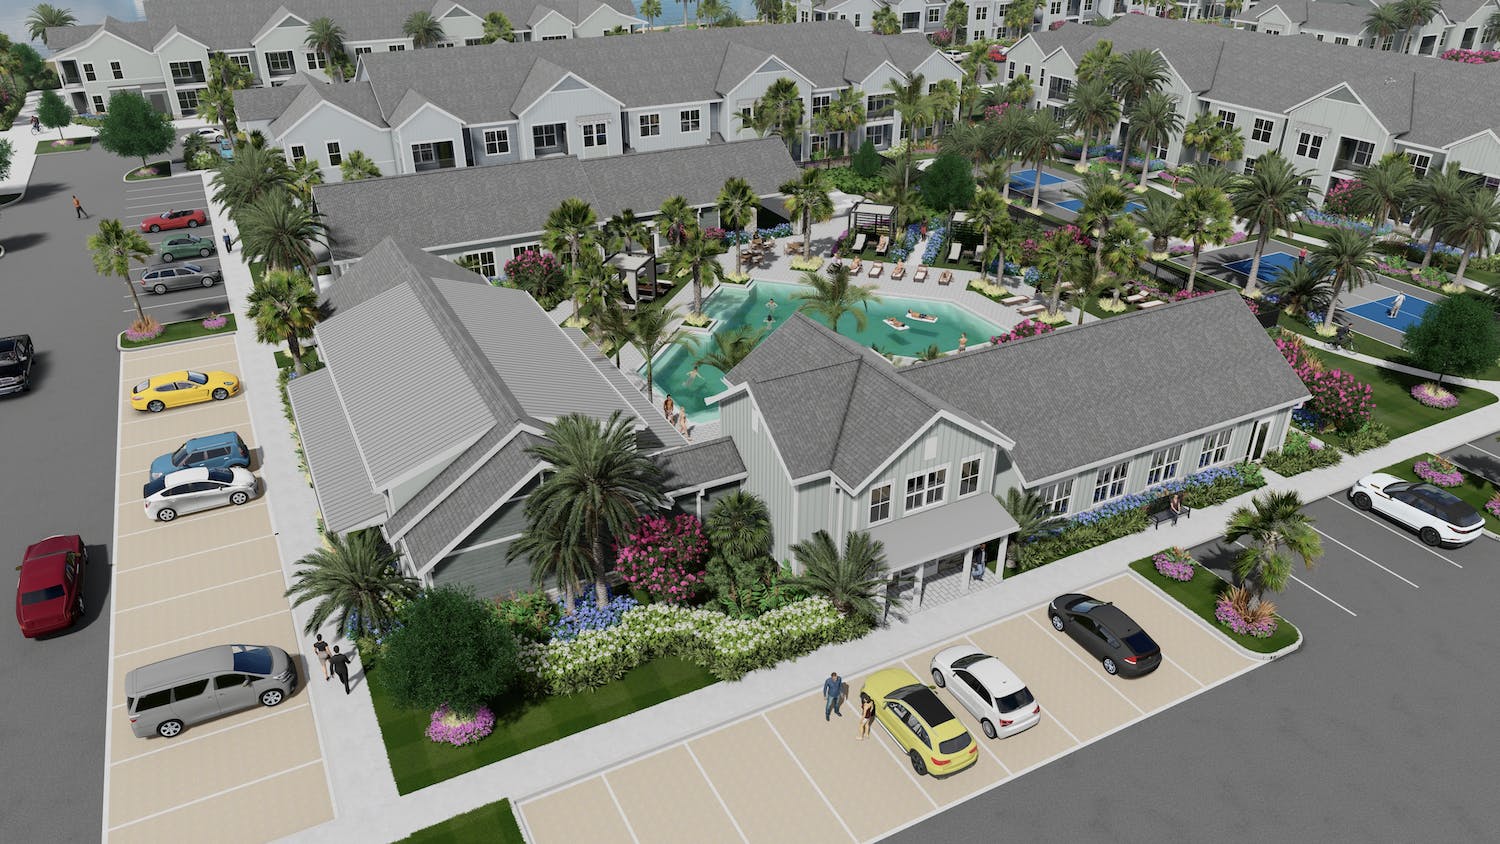 Thompson Thrift Announces Development of 380-Unit The Junction at Rockledge Luxury Multifamily Community in Florida's Space Coast